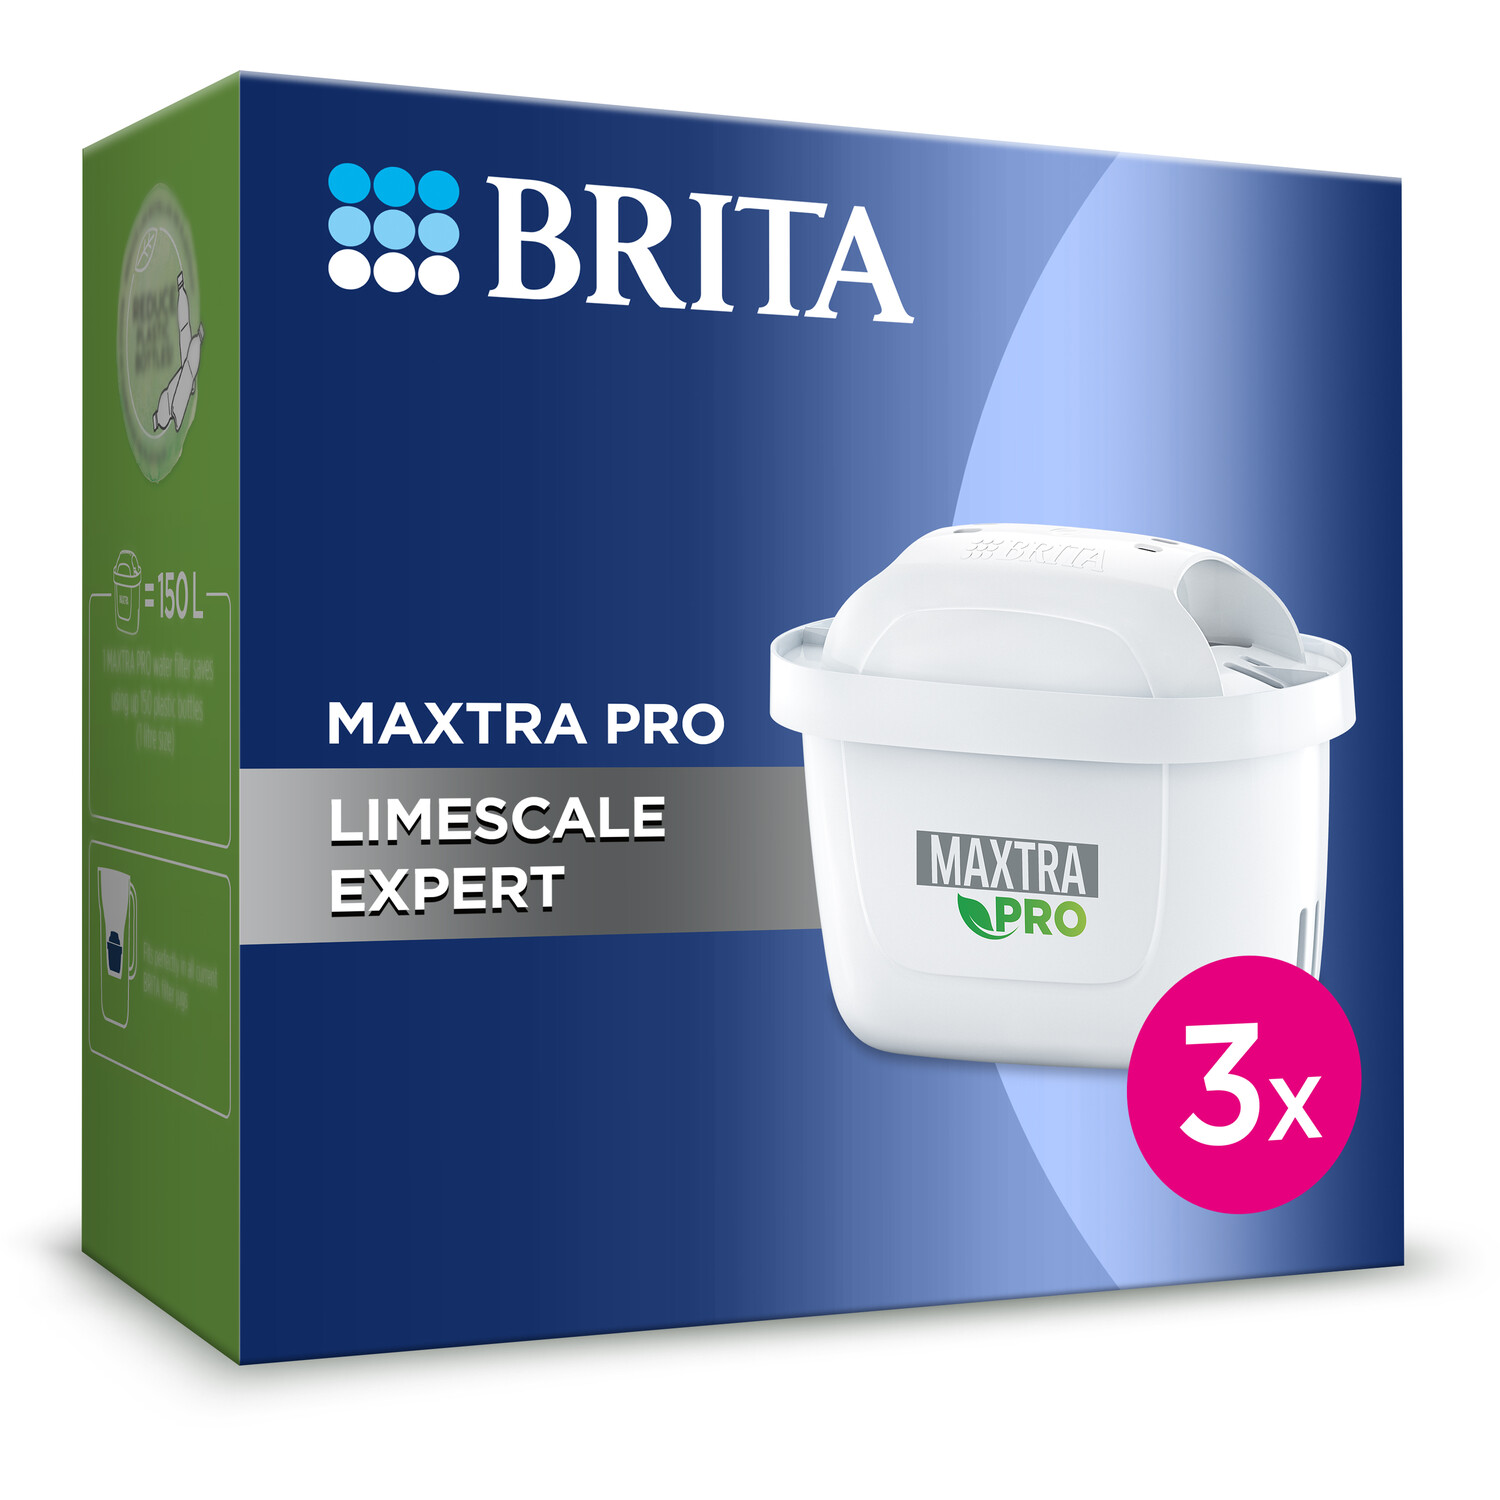 Brita Maxtra Pro White Limescale Expert Water Filter Cartridges 3 Pack Image 2